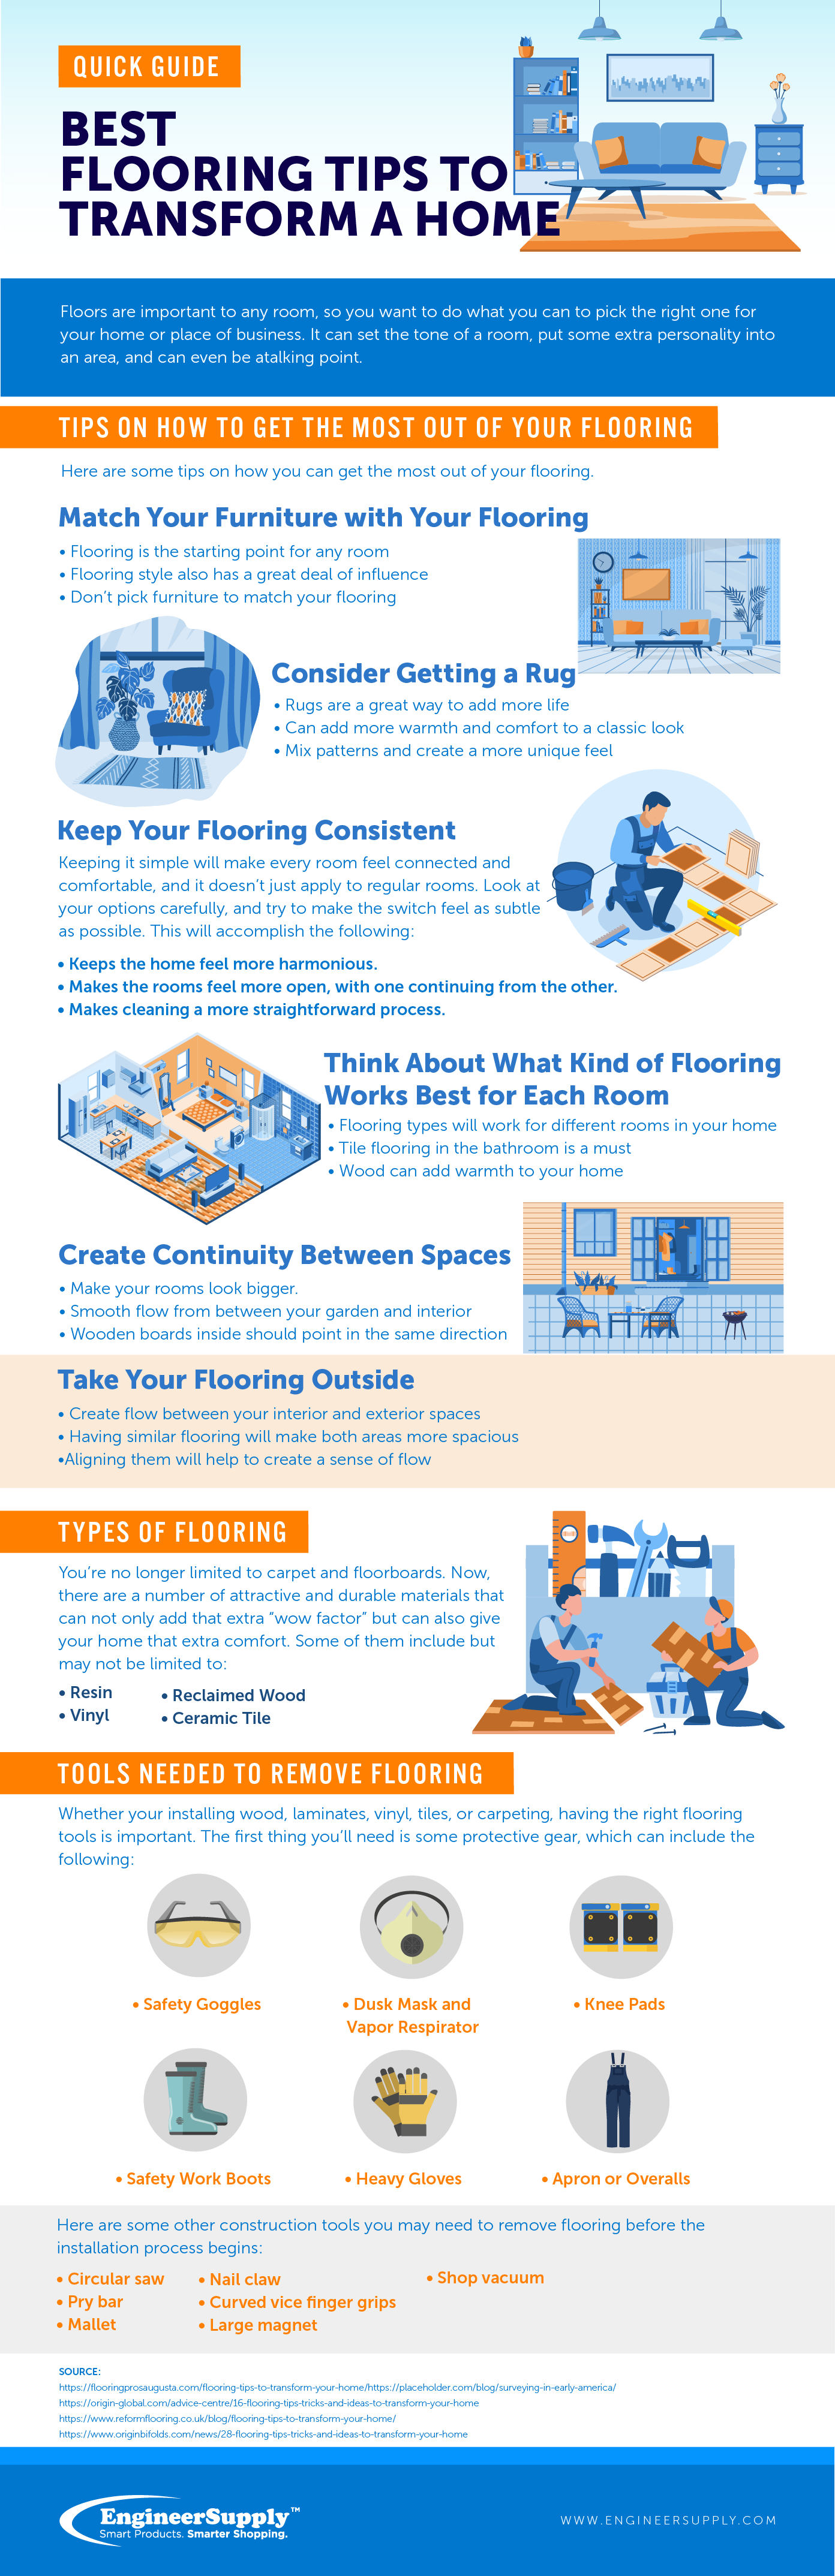 Best Flooring Tips To Transform A Home infographic